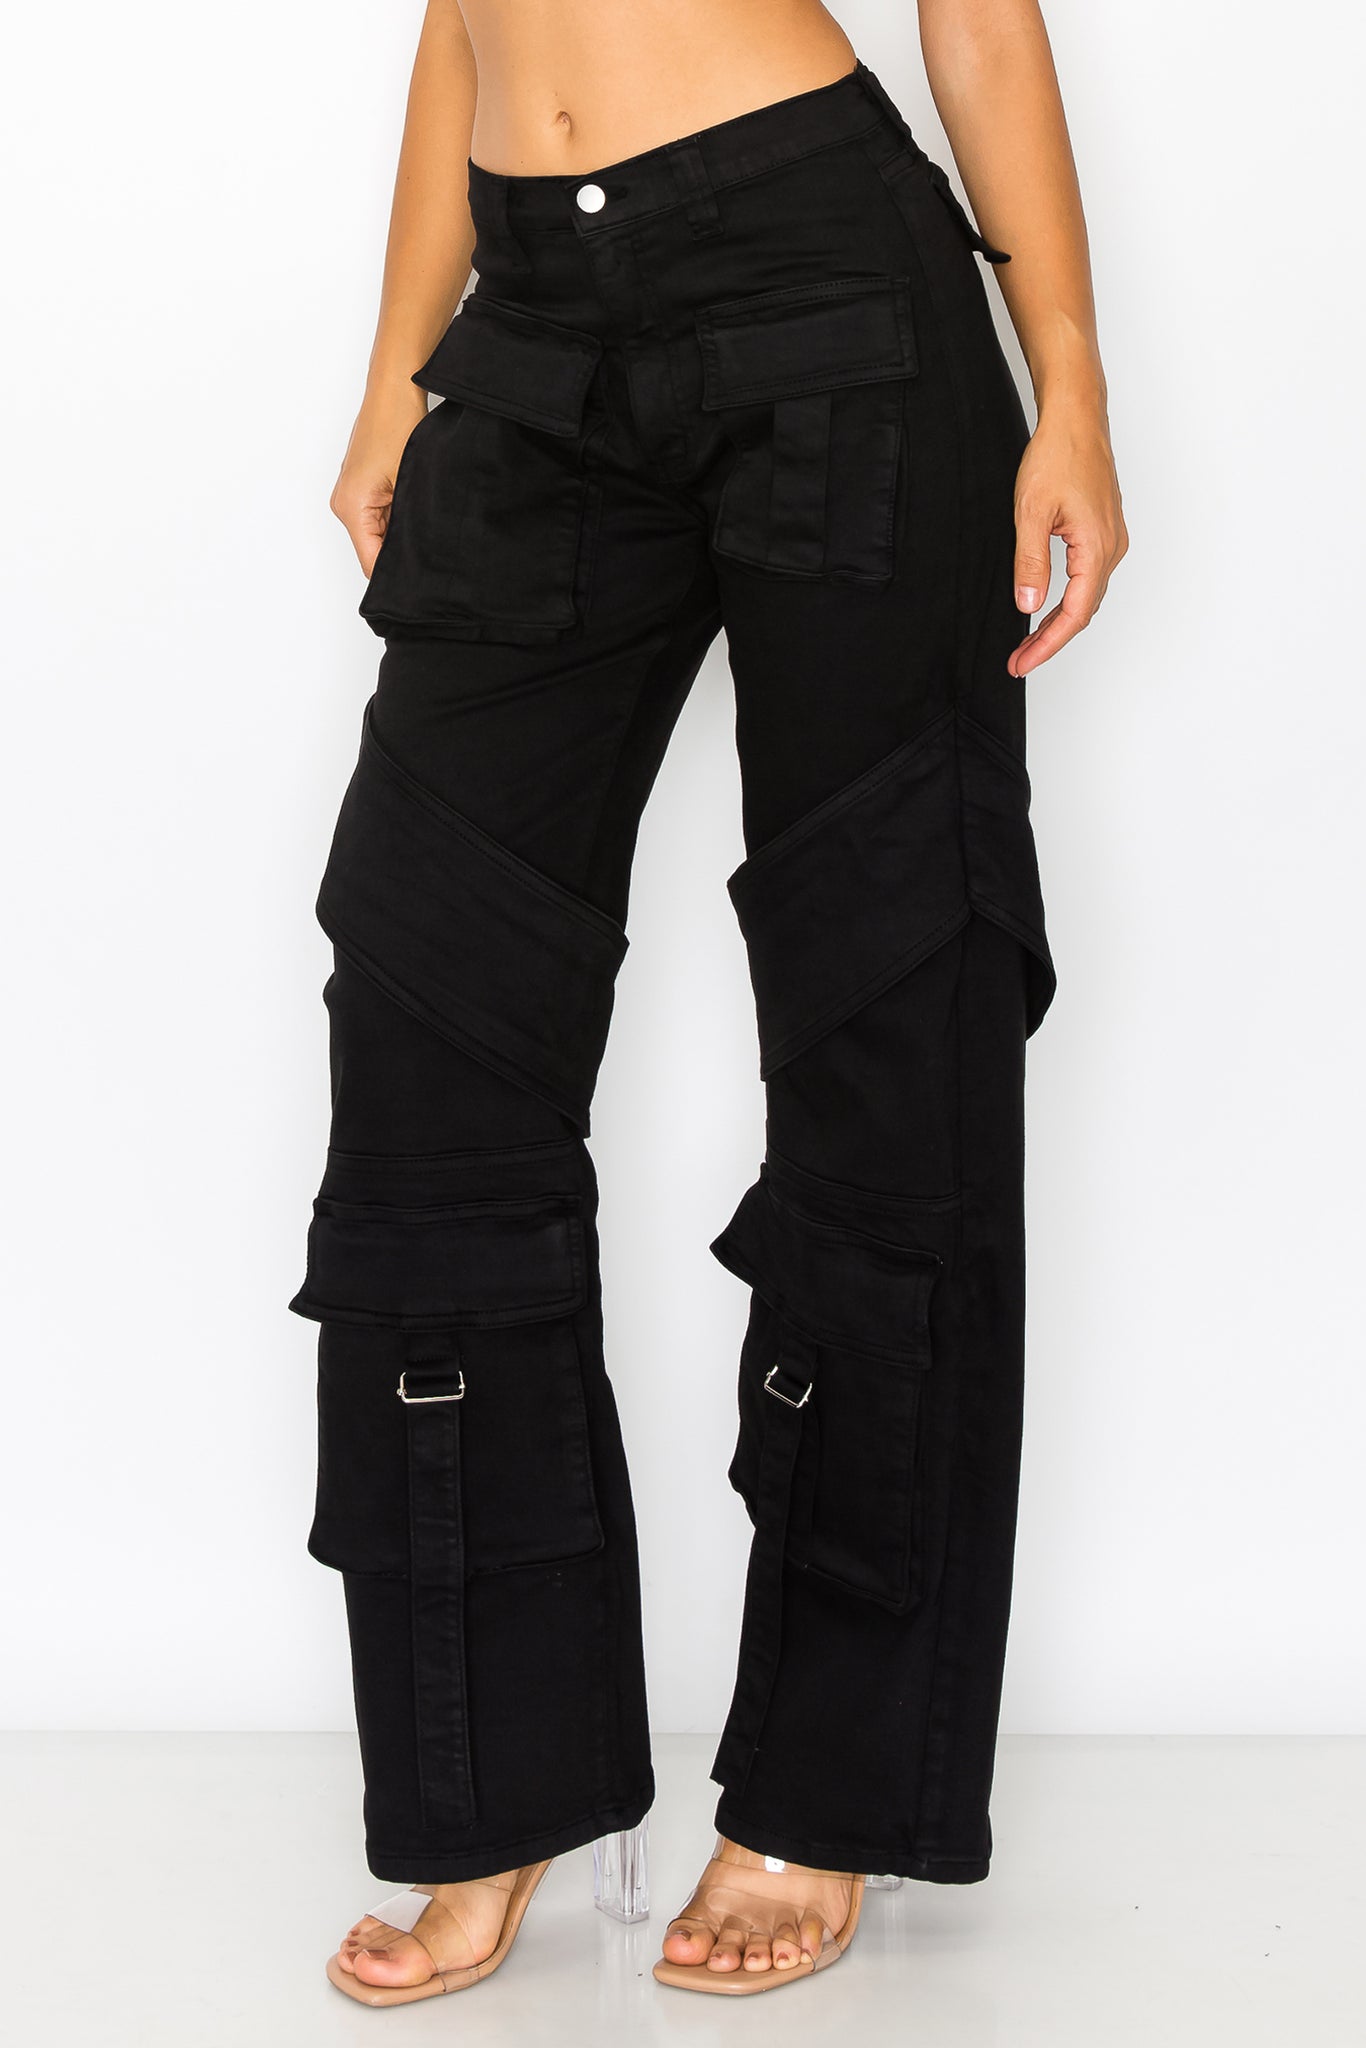 40480 Women's High Rise Cargo Pants with Pockets Classic fit Casual Denim